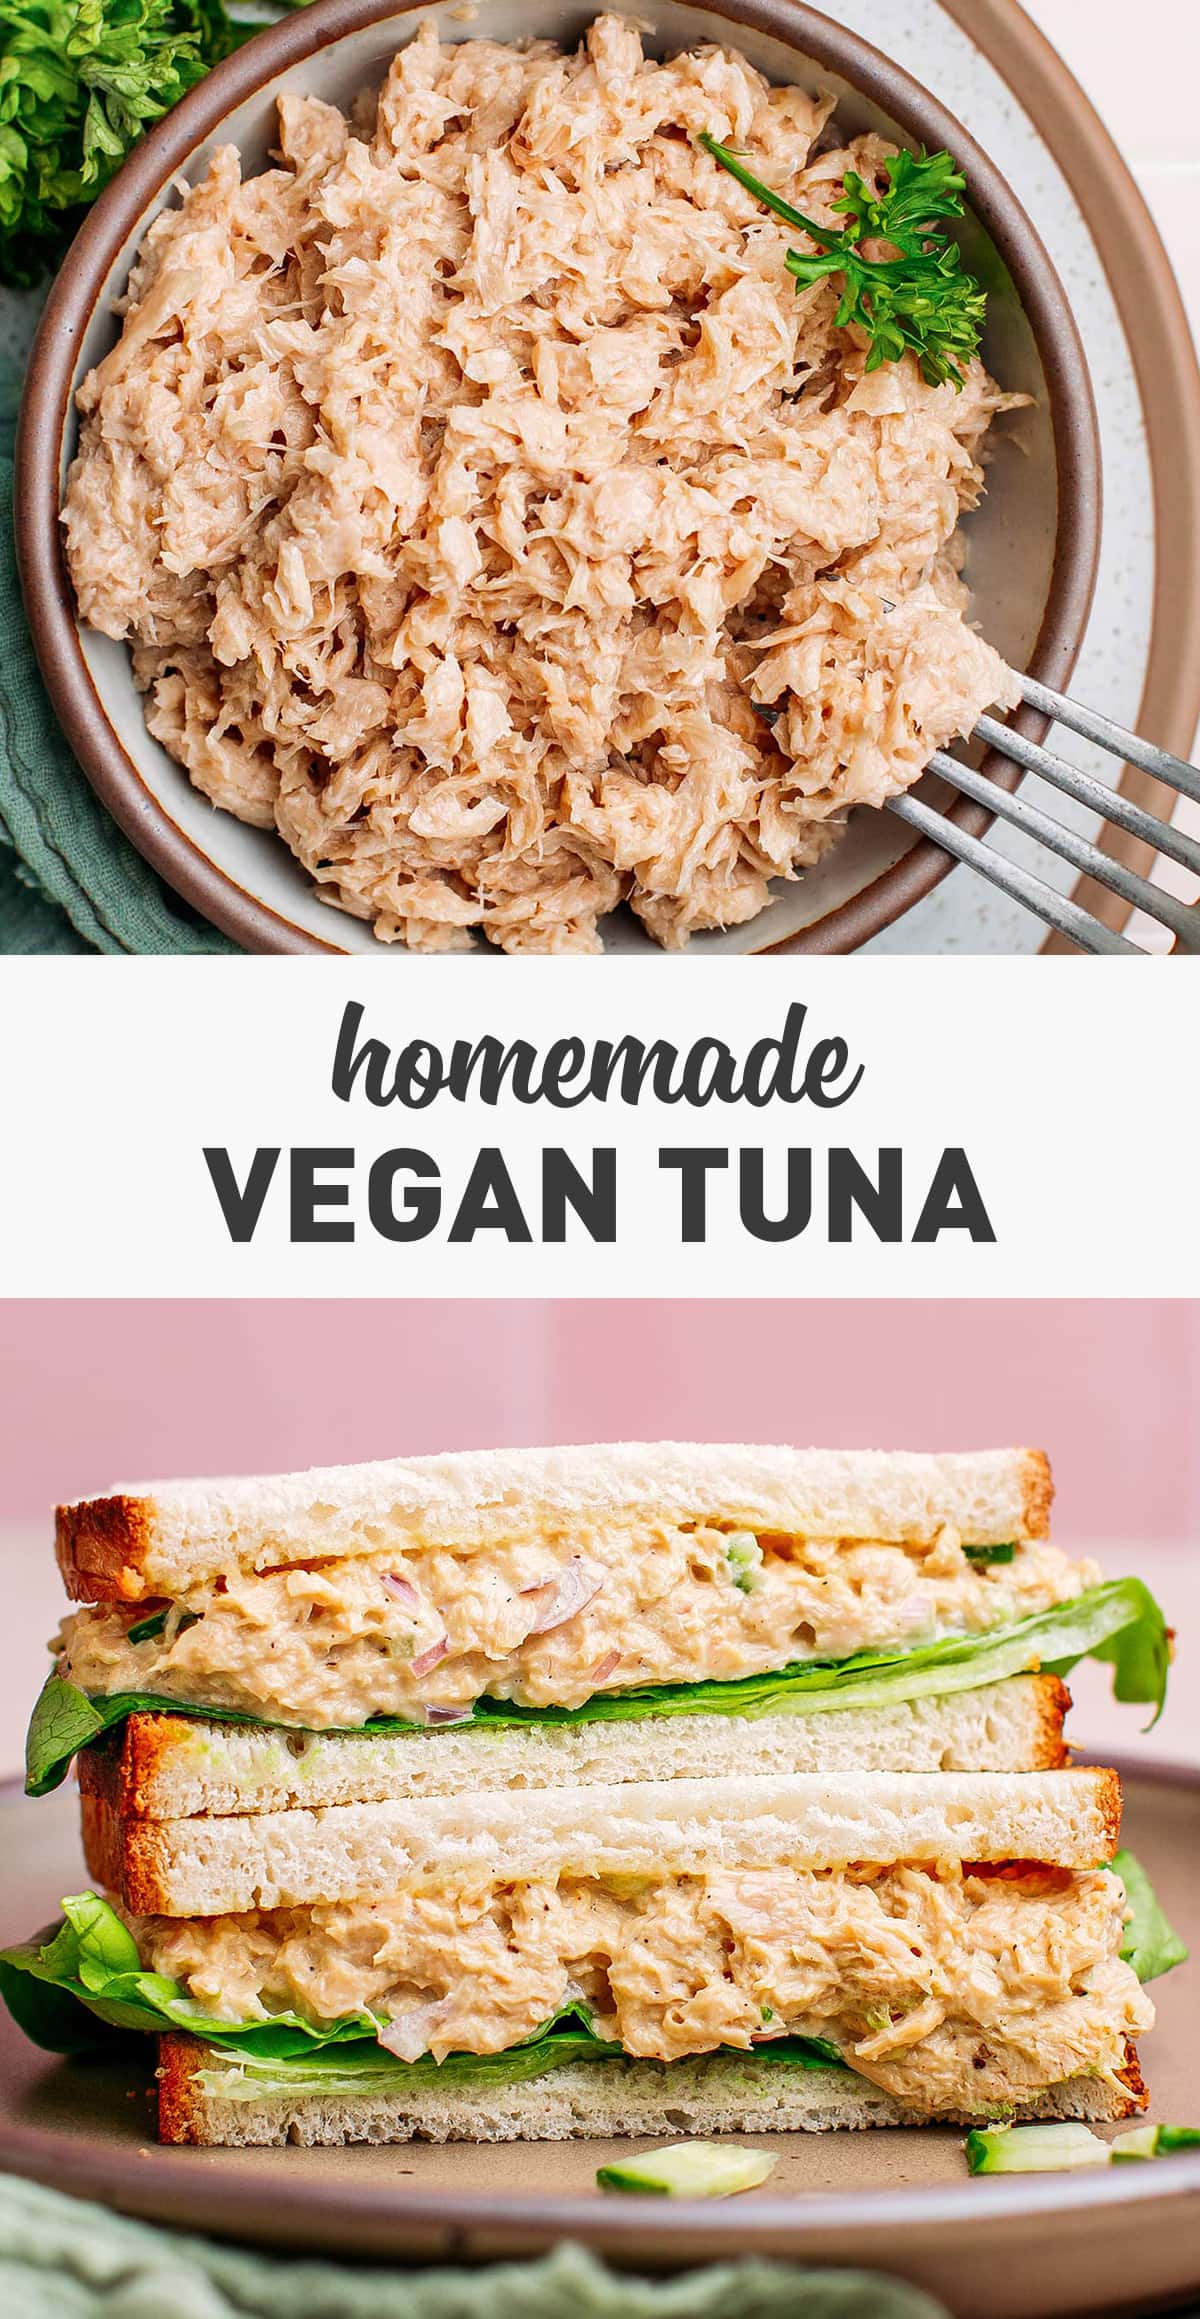 Make your own vegan tuna from 7 ingredients! This flaky, flavorful plant-based tuna has a delicate sea taste that will bring back memories of the real thing. Use it as a base to make tuna salad, incorporate it in pasta dishes, or use it in wraps and sandwiches! #vegan #tuna #veganrecipes